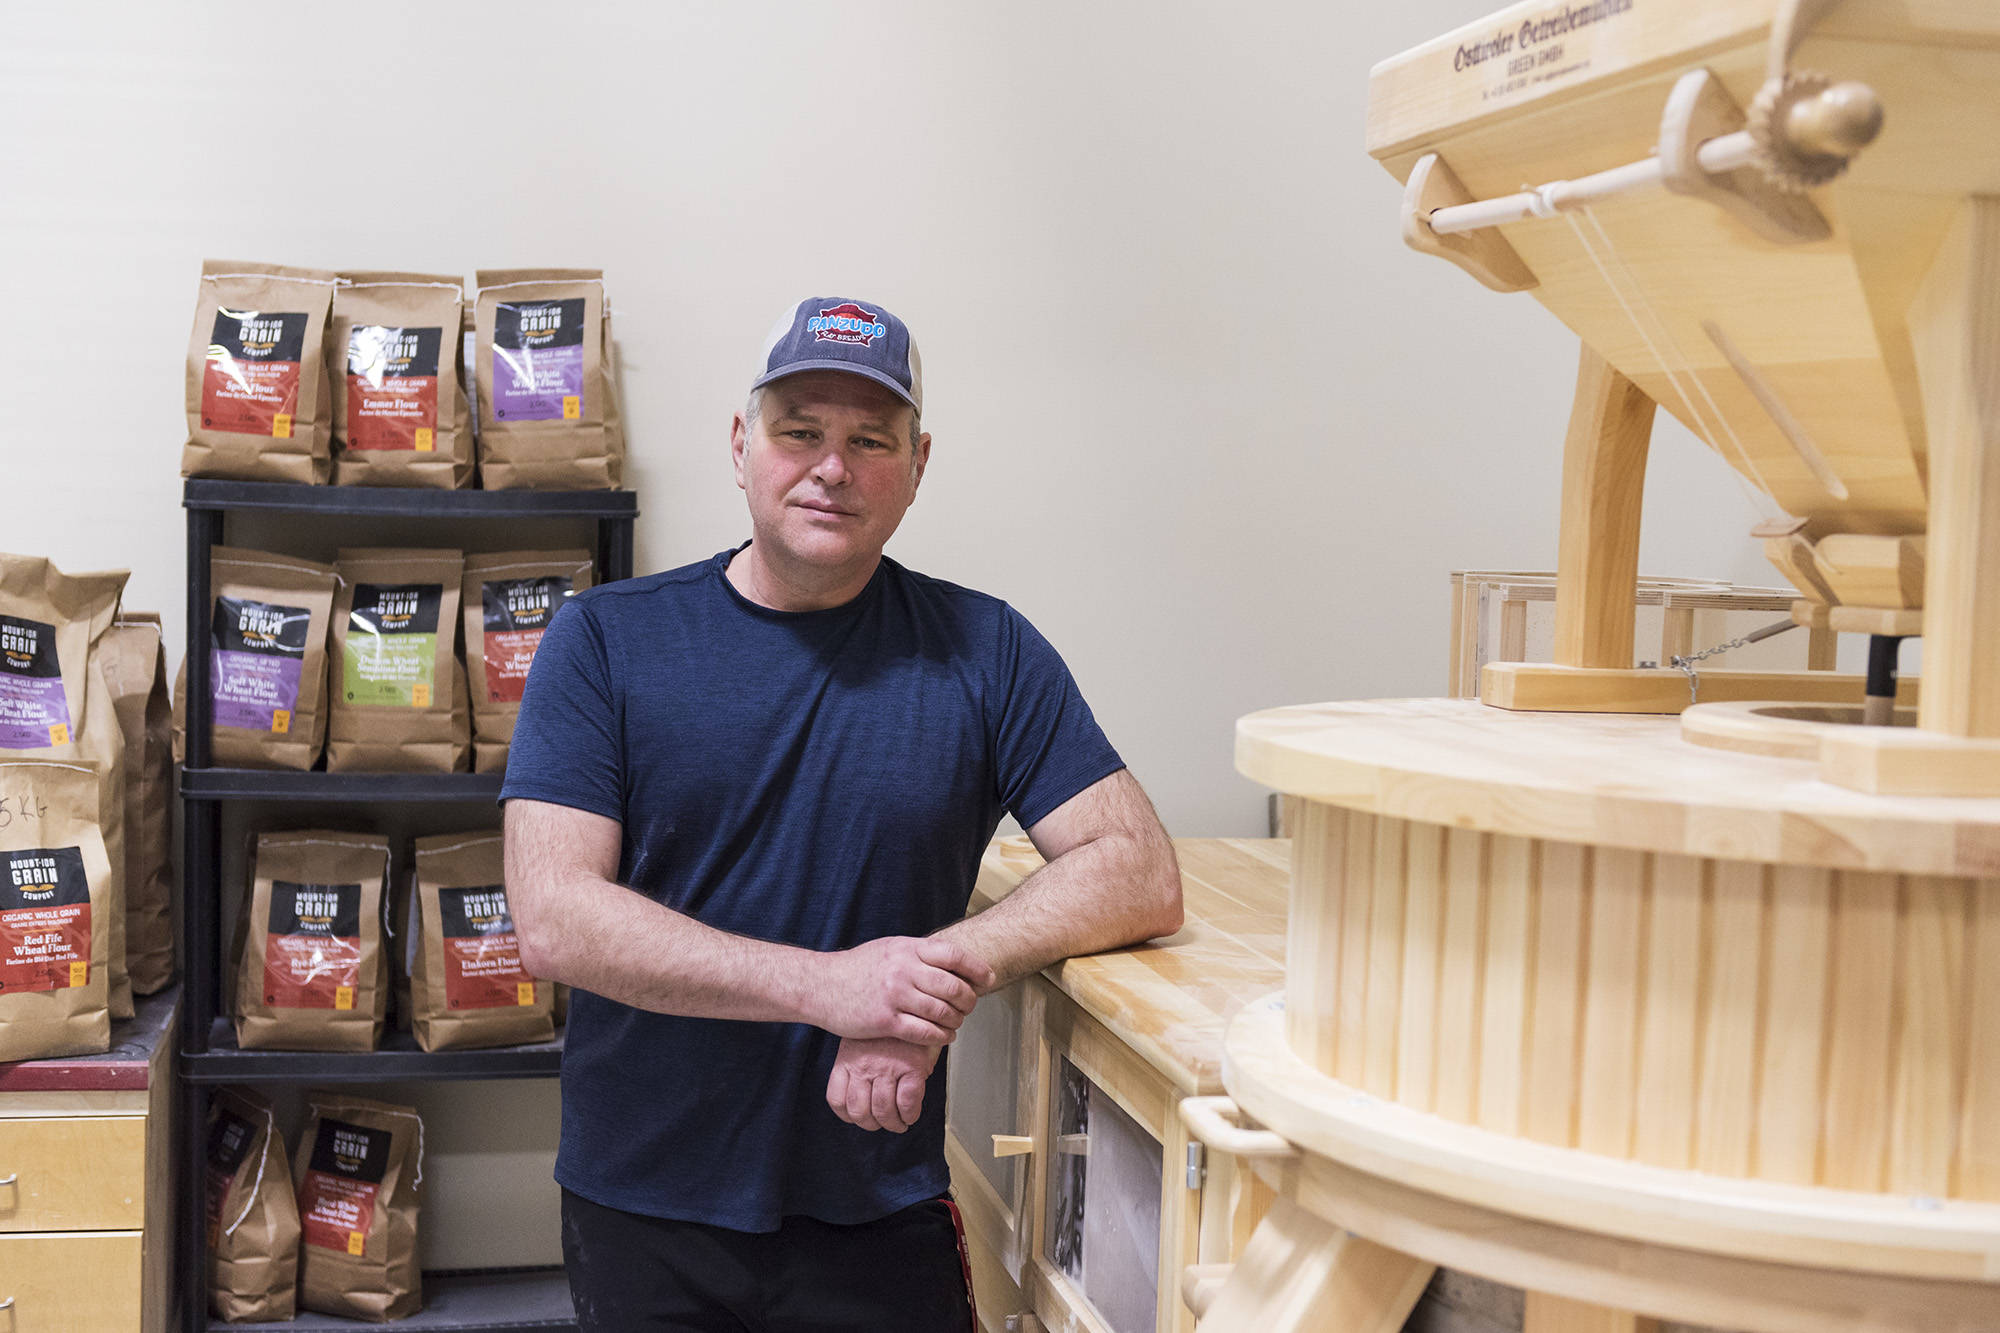 Salmon Arm businessman David Allard stands next to the stone mill he uses to produce organic flours for his Mount Ida Grain Company, which he uses for the pizzas produced by his other business, the Westgate Food Hub, both of which are located in the Westgate Public Market, on Thursday, March 18. 2021. (Lachlan Labere-Salmon Arm Observer)